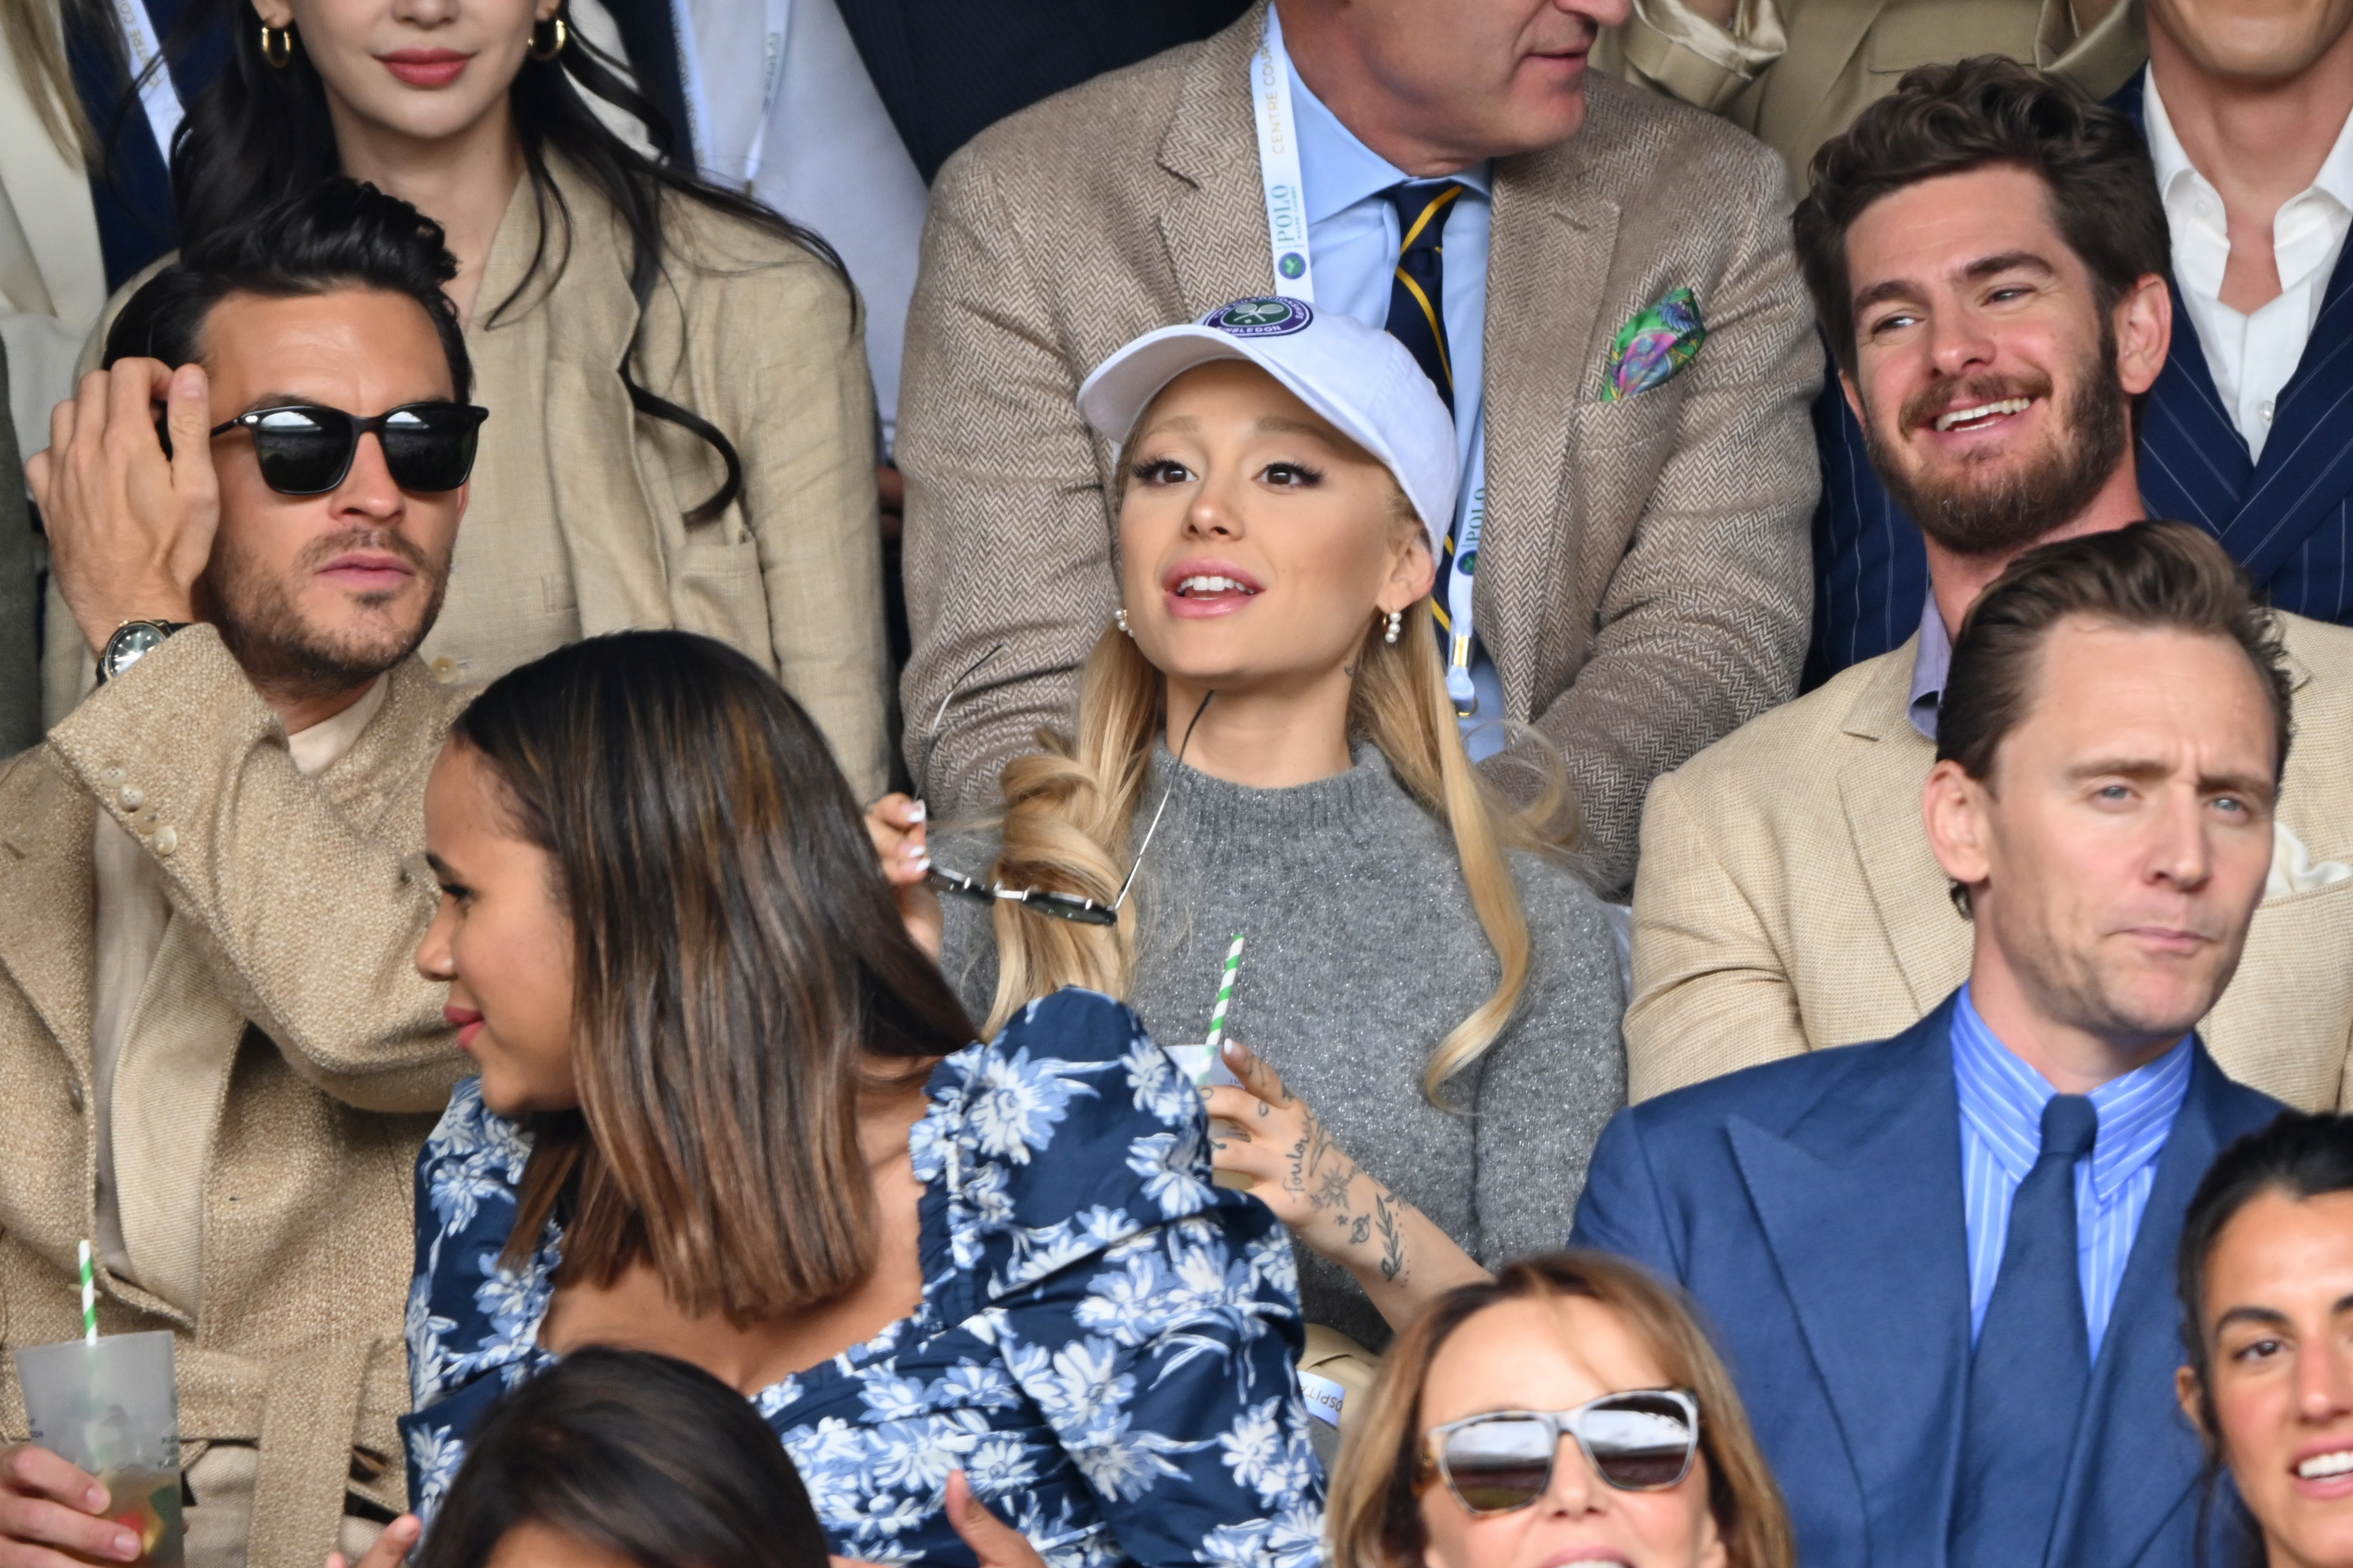 Ariana Grande in a crowd sitting in between Jonathan Bailey and Andrew Garfield